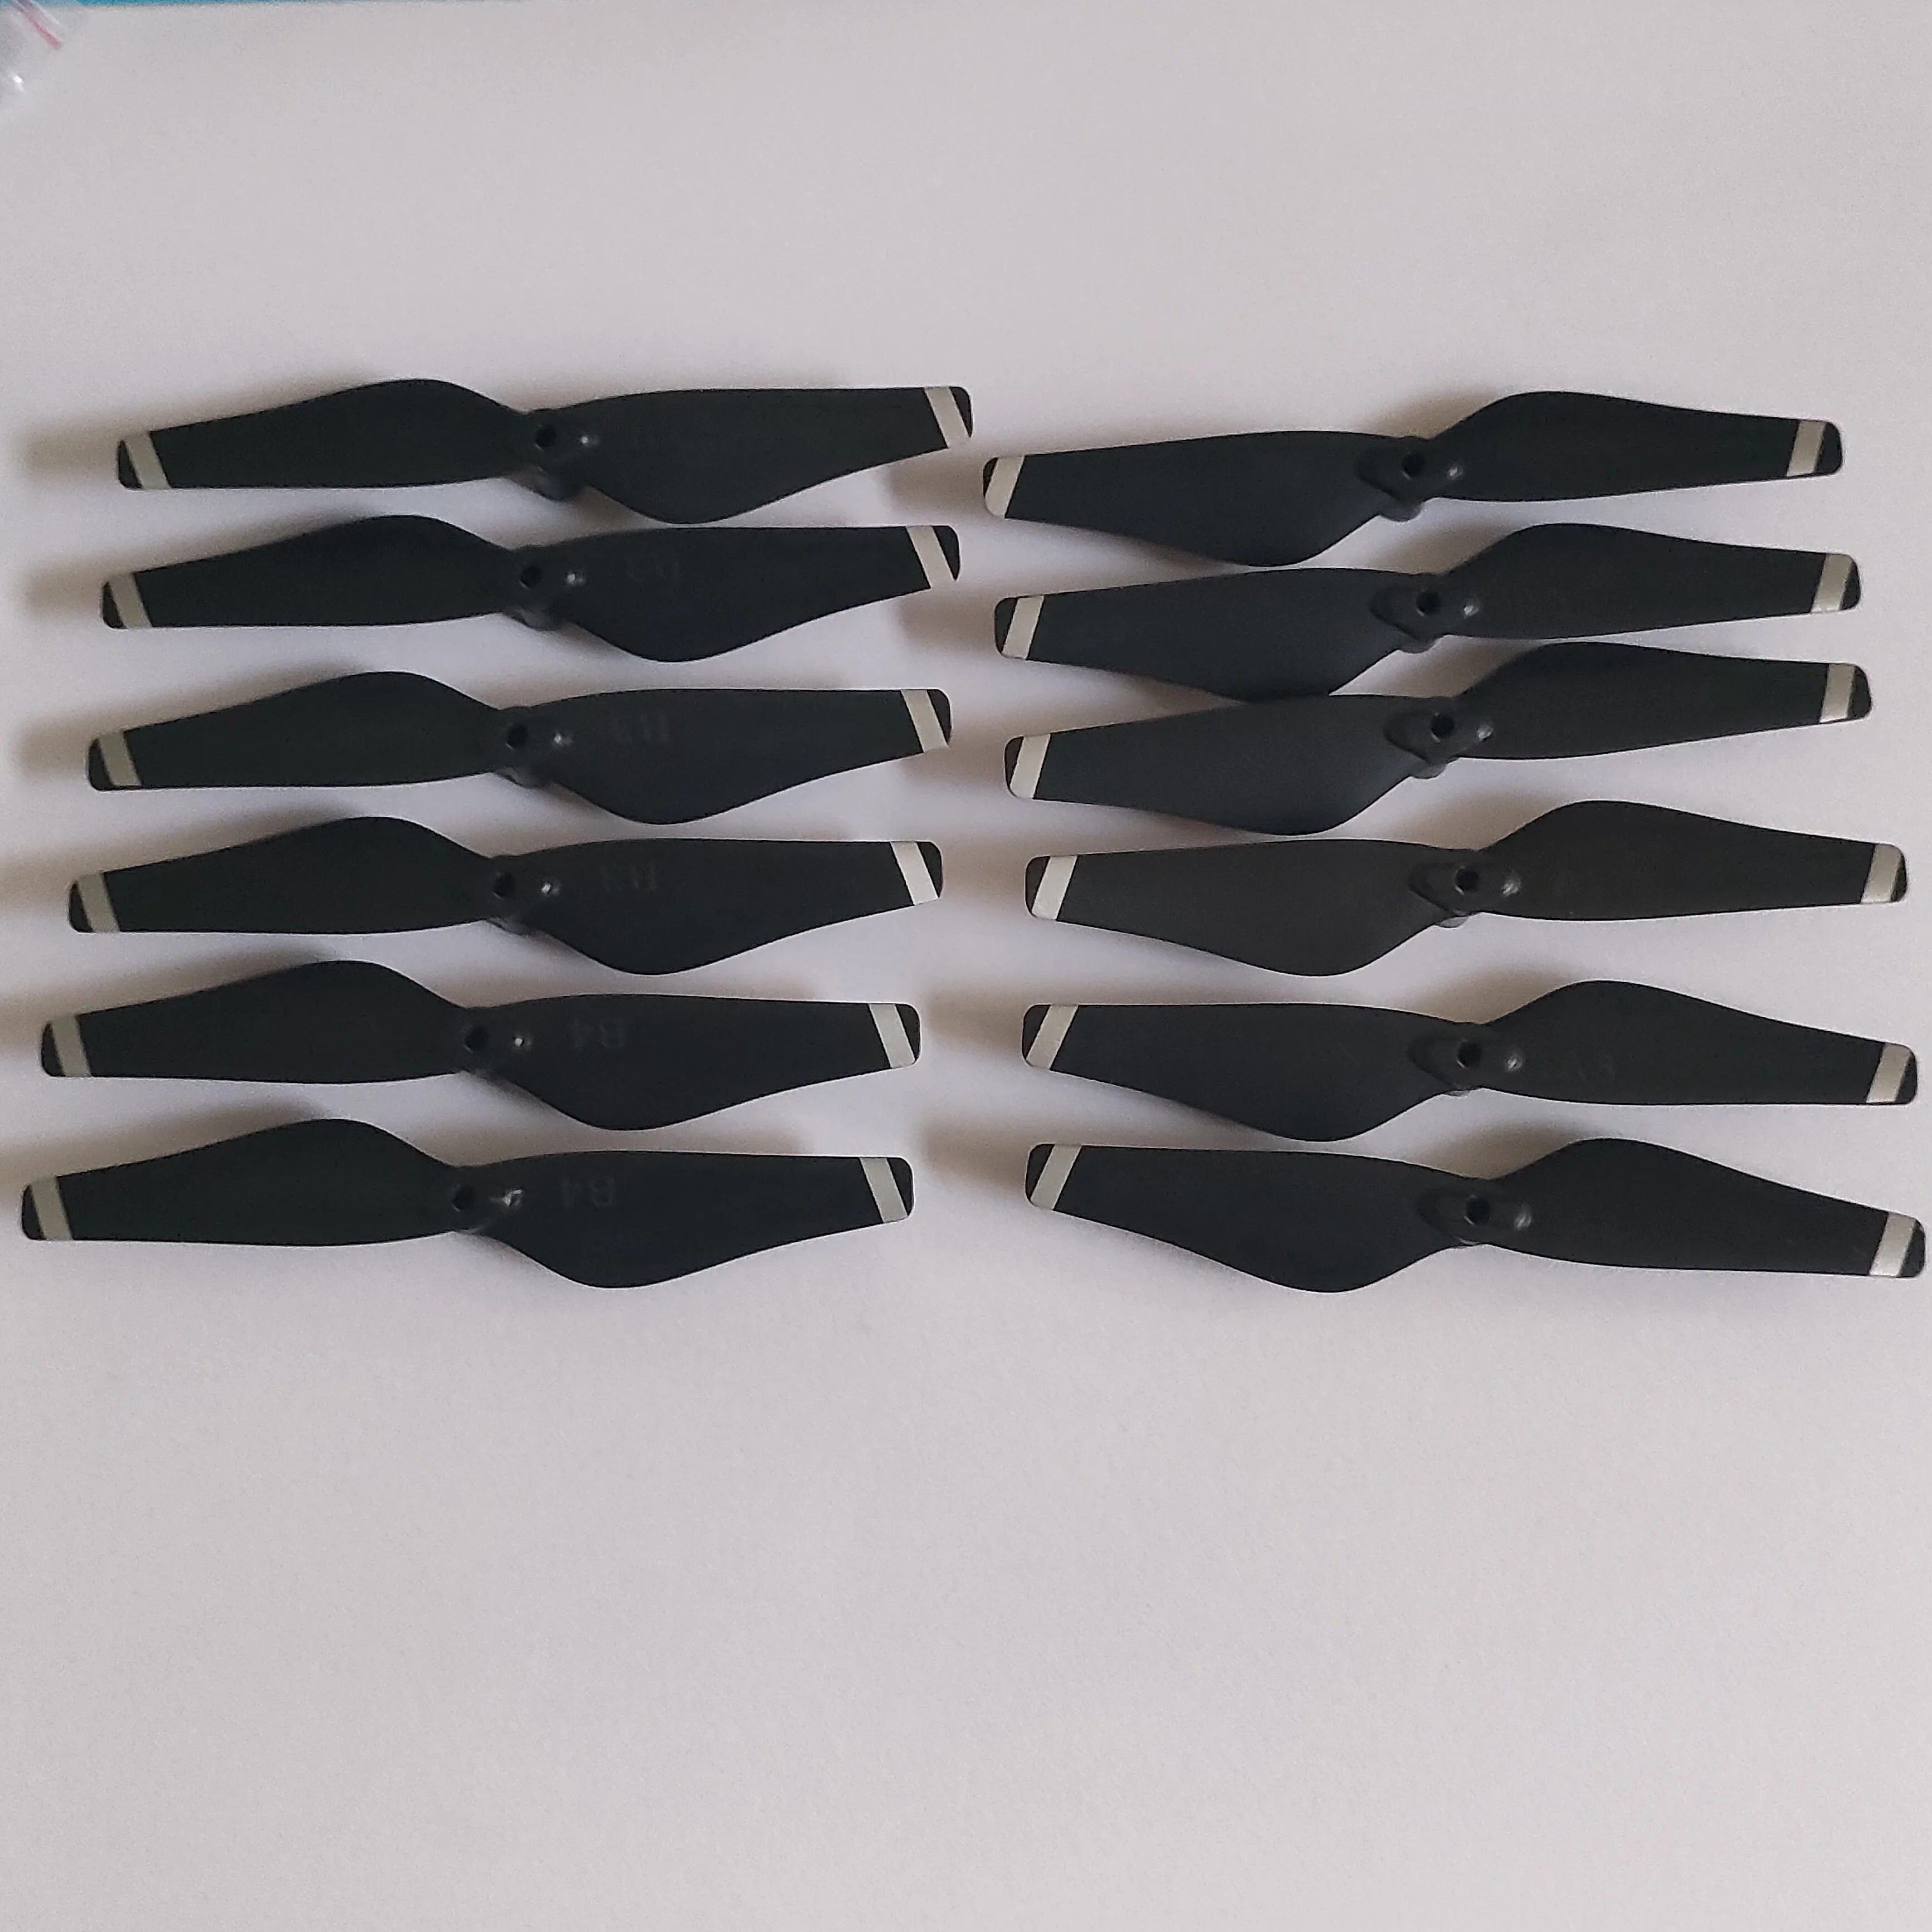 

12PCS K98Pro2 Drone Blades Spare Parts K98 Pro2 RC Quadcopter CW CCW Propellers Blade Accessories